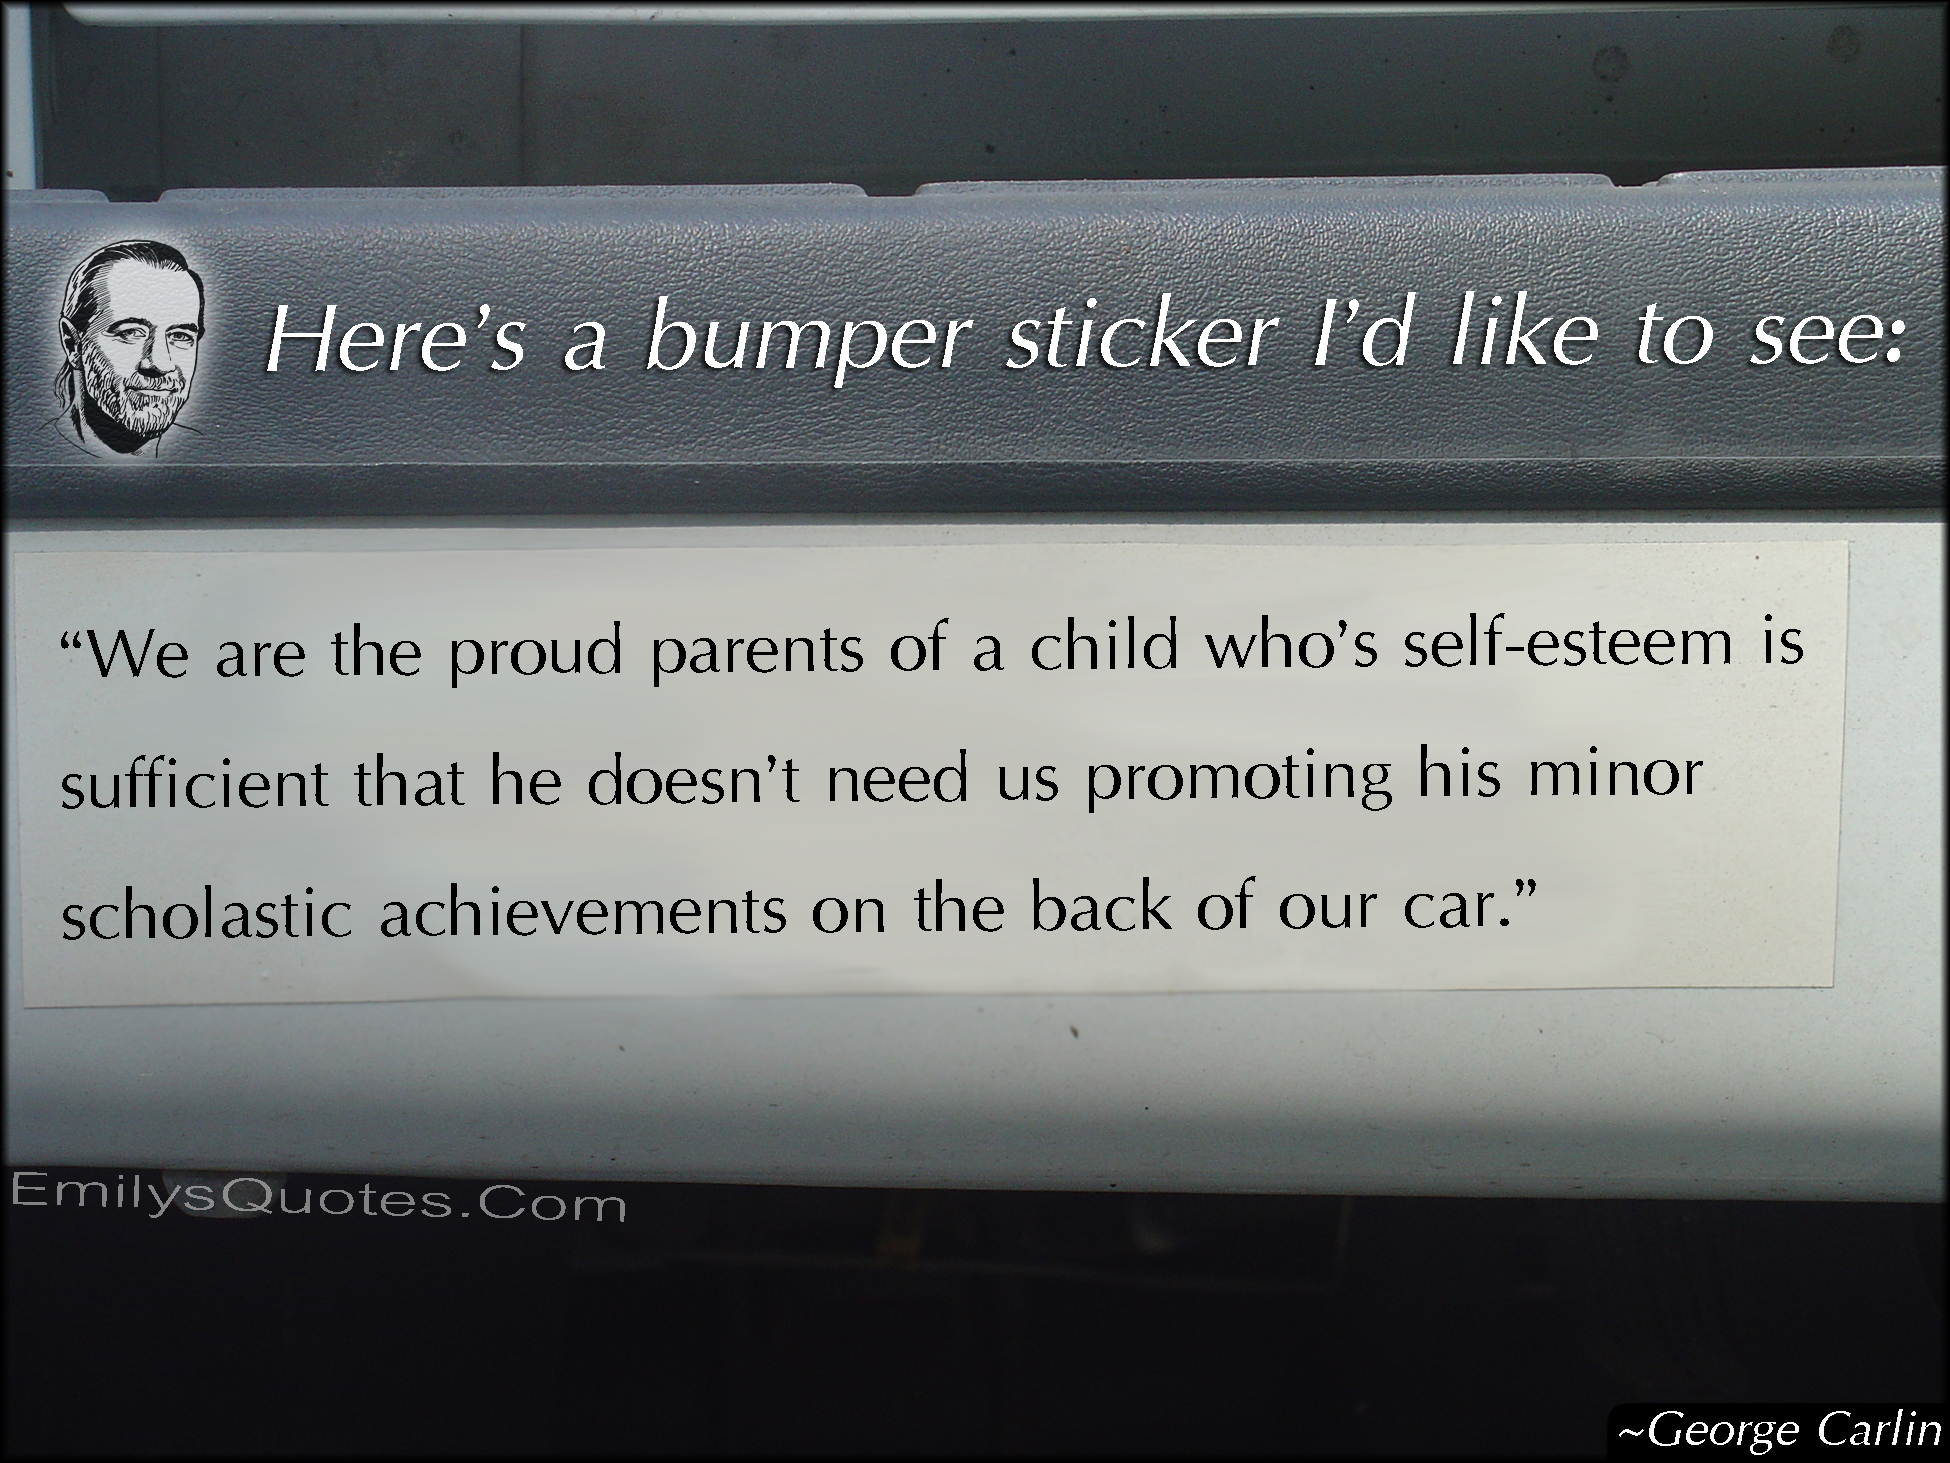 Here’s a bumper sticker I’d like to see: “We are the proud parents of a child who’s self-esteem is sufficient that he doesn’t need us promoting his minor scholastic achievements on the back of our car